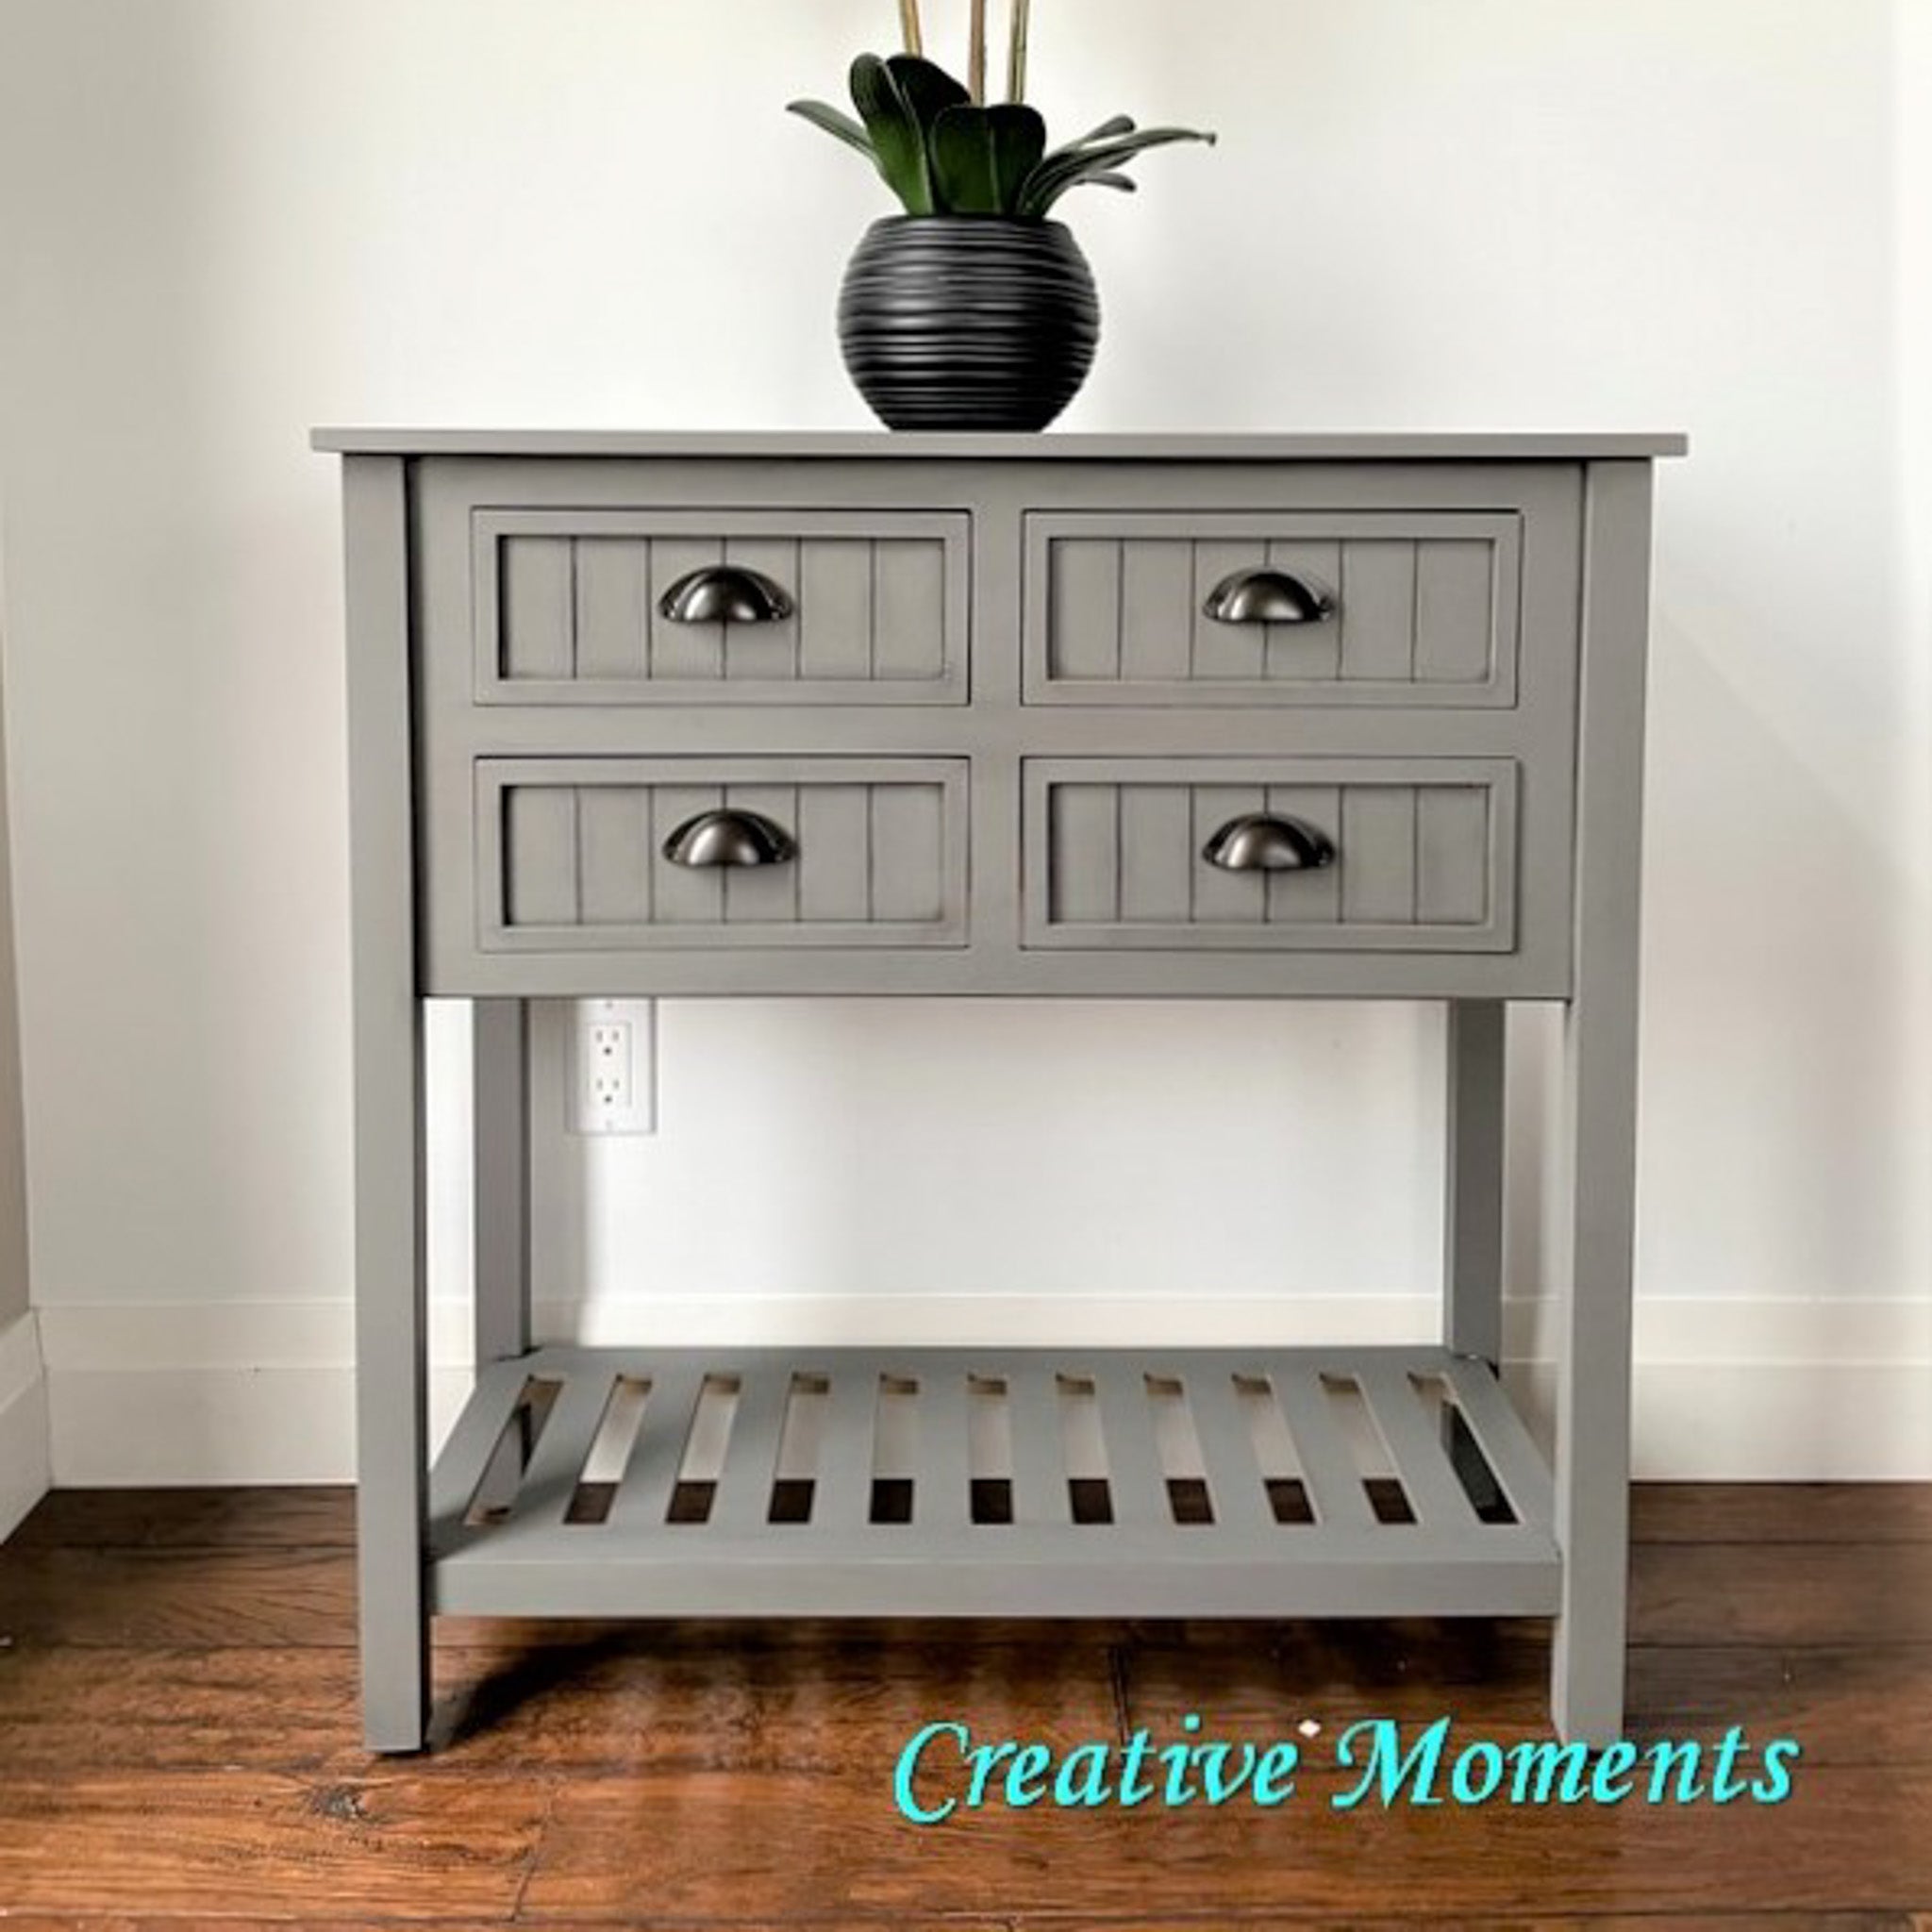 A vintage side table refurbished by Creative Moments is painted in Dixie Belle's Hurricane Gray chalk mineral paint.